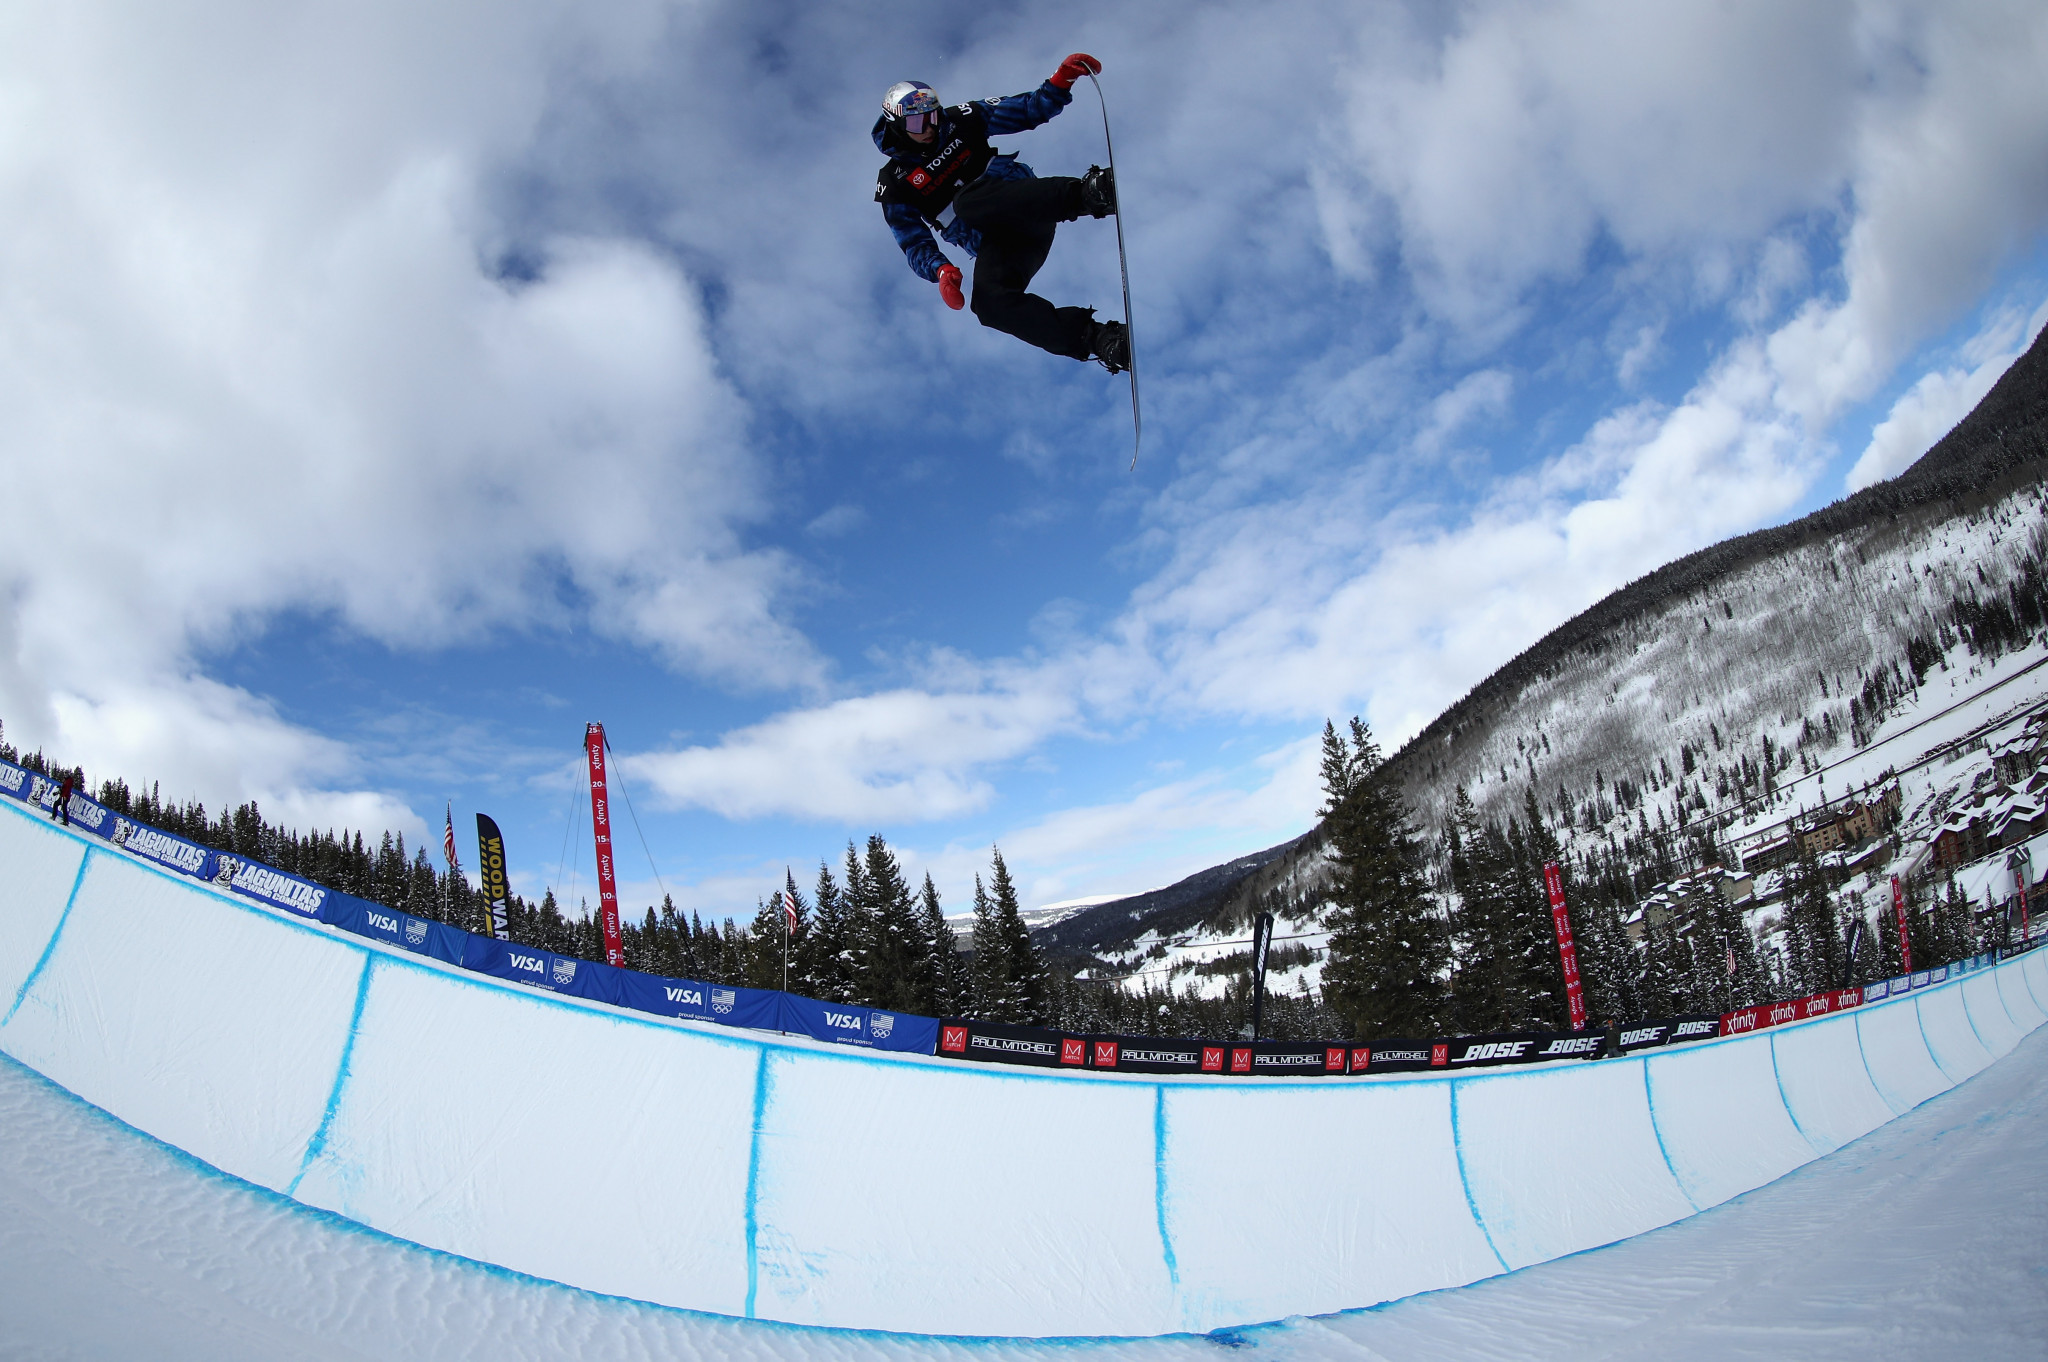 Australia's Scotty James was the stand-out performer in the men's halfpipe qualification round ©Getty Images